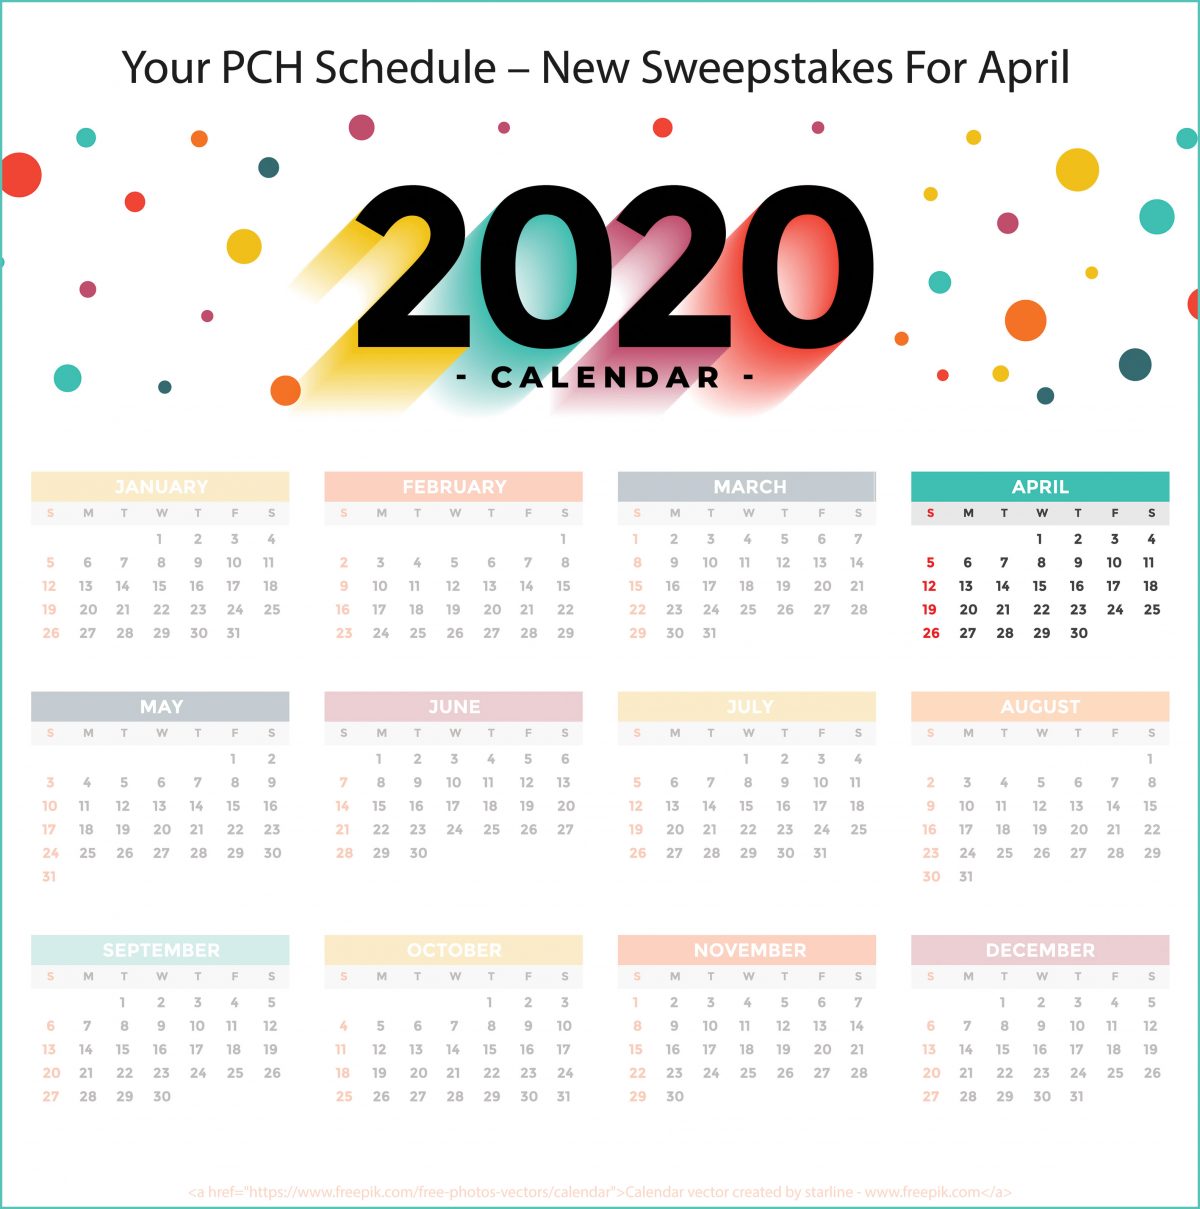 YOUR PCH SCHEDULE – NEW SWEEPSTAKES TO ENTER FOR APRIL